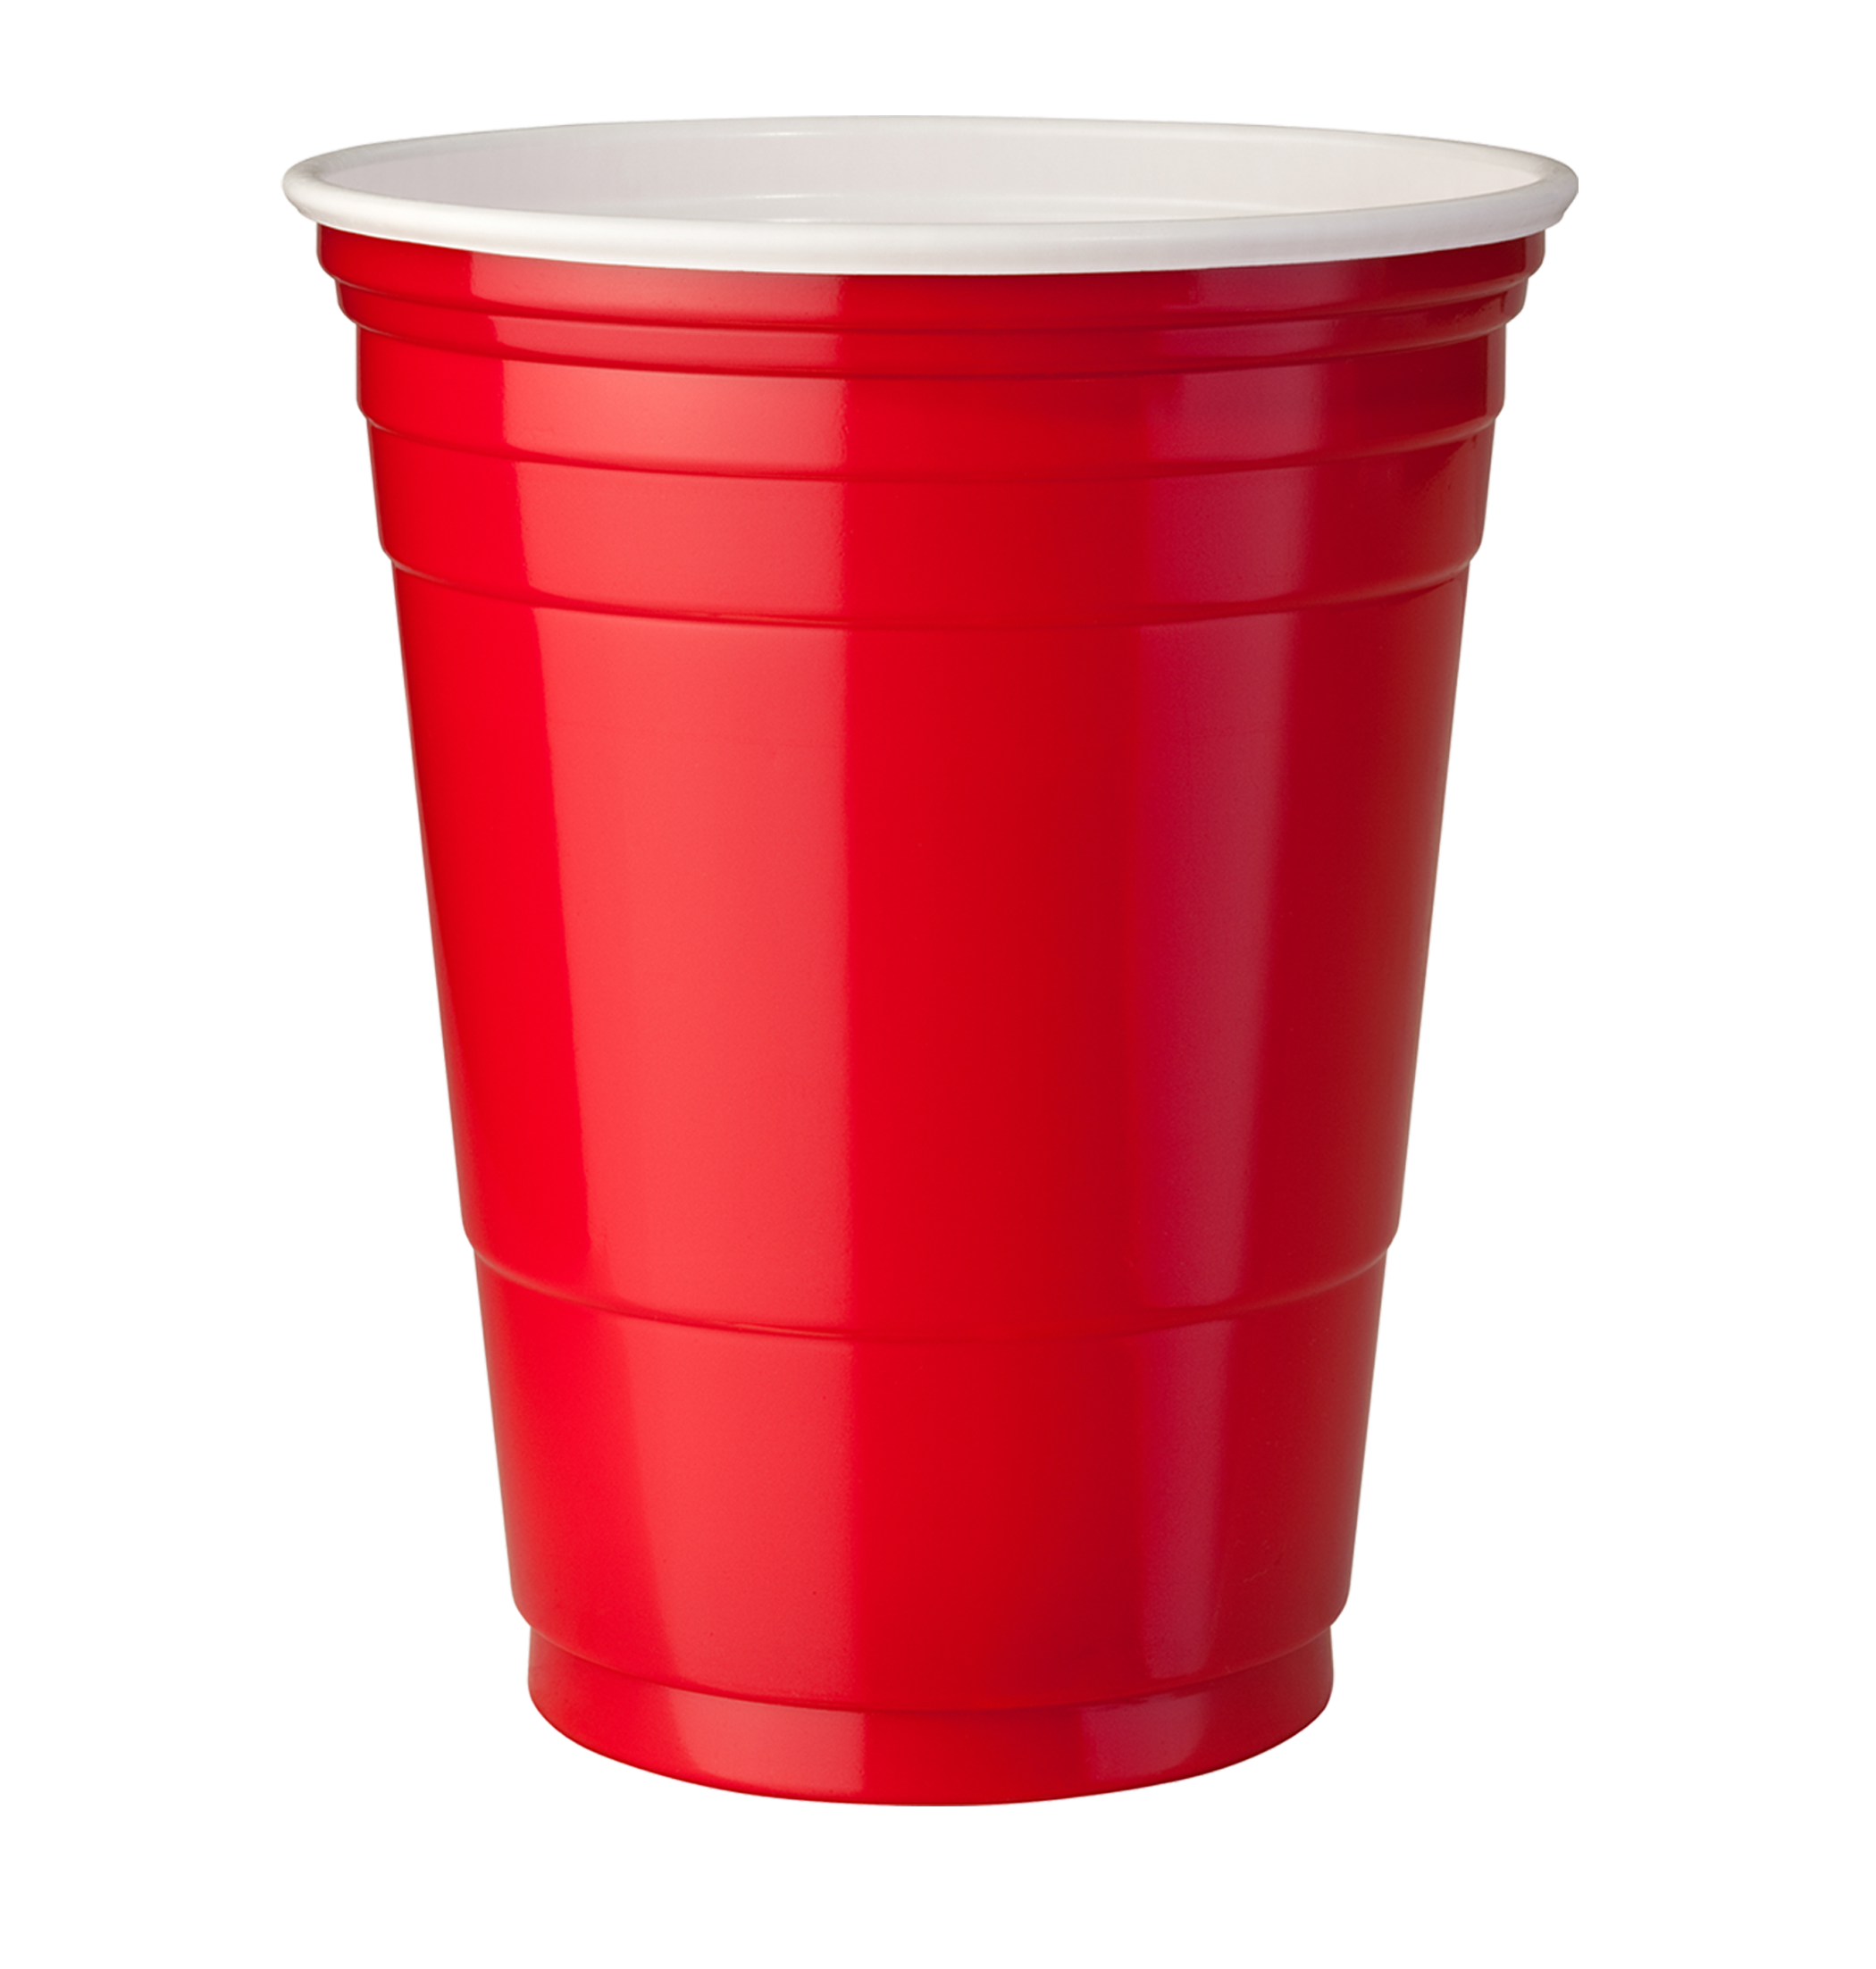 https://clipart-library.com/images_k/solo-cup-silhouette/solo-cup-silhouette-12.png